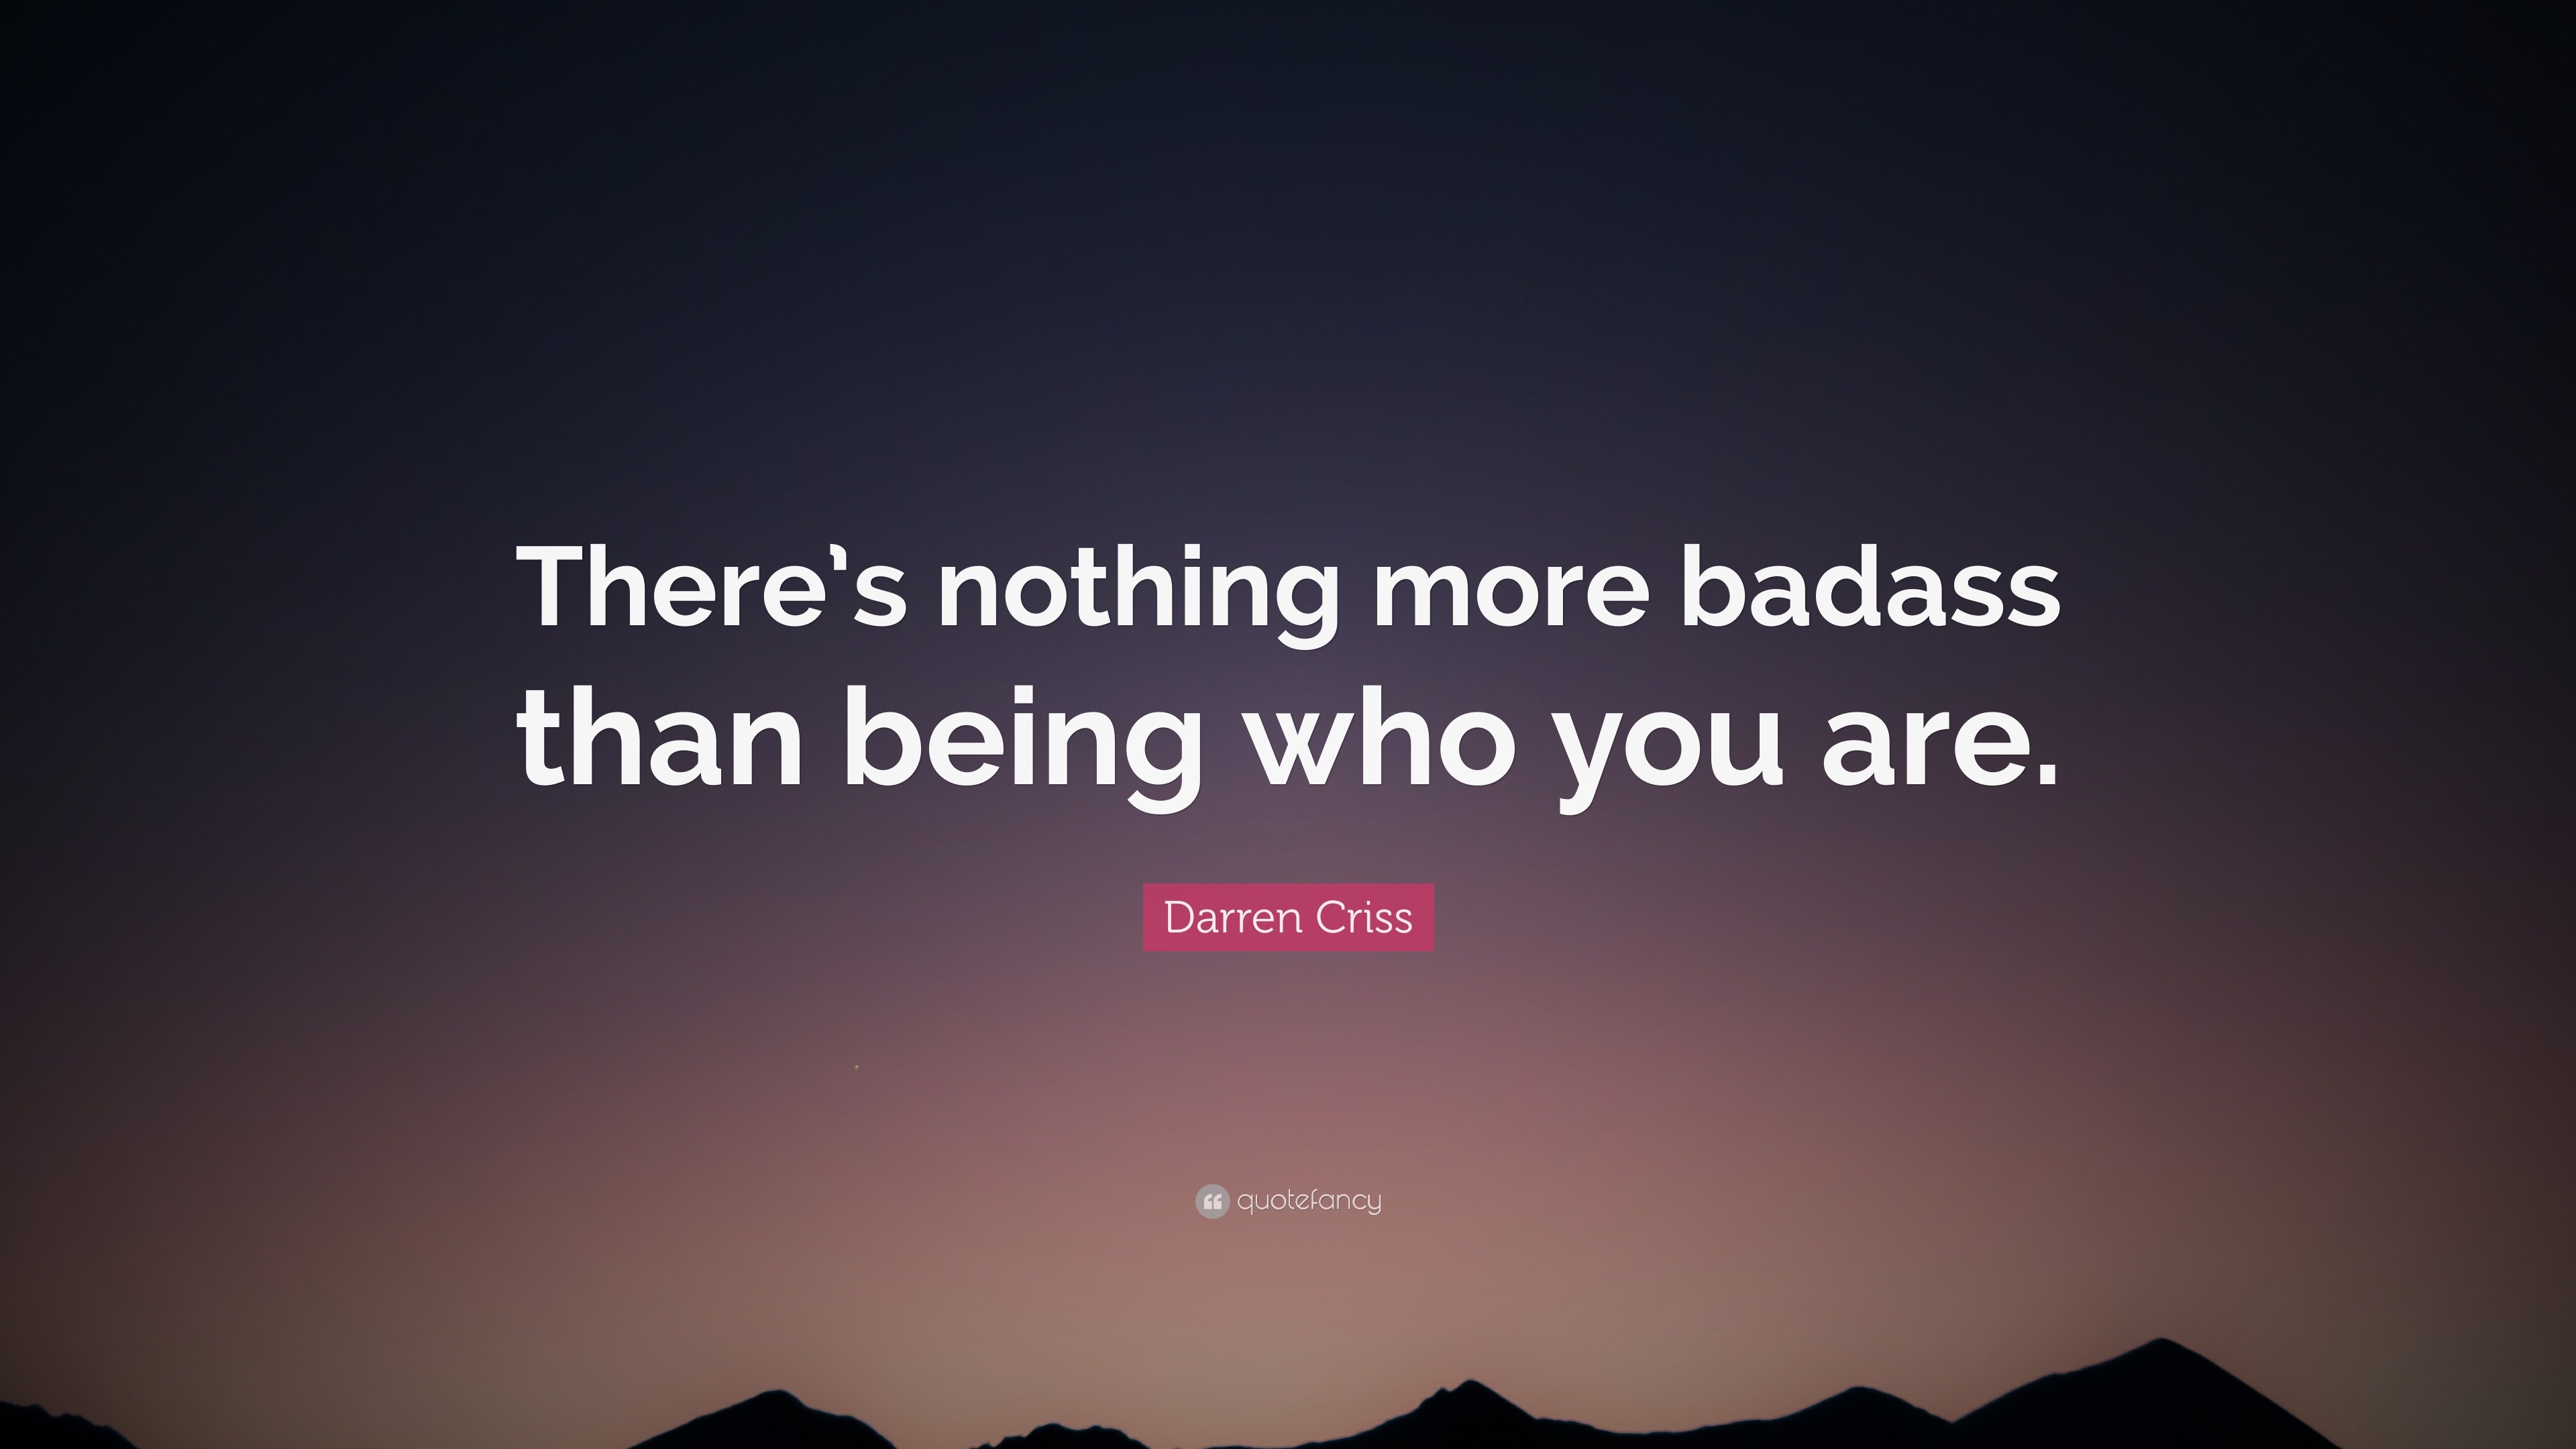 Darren Criss Quote: “There’s nothing more badass than being who you are.”